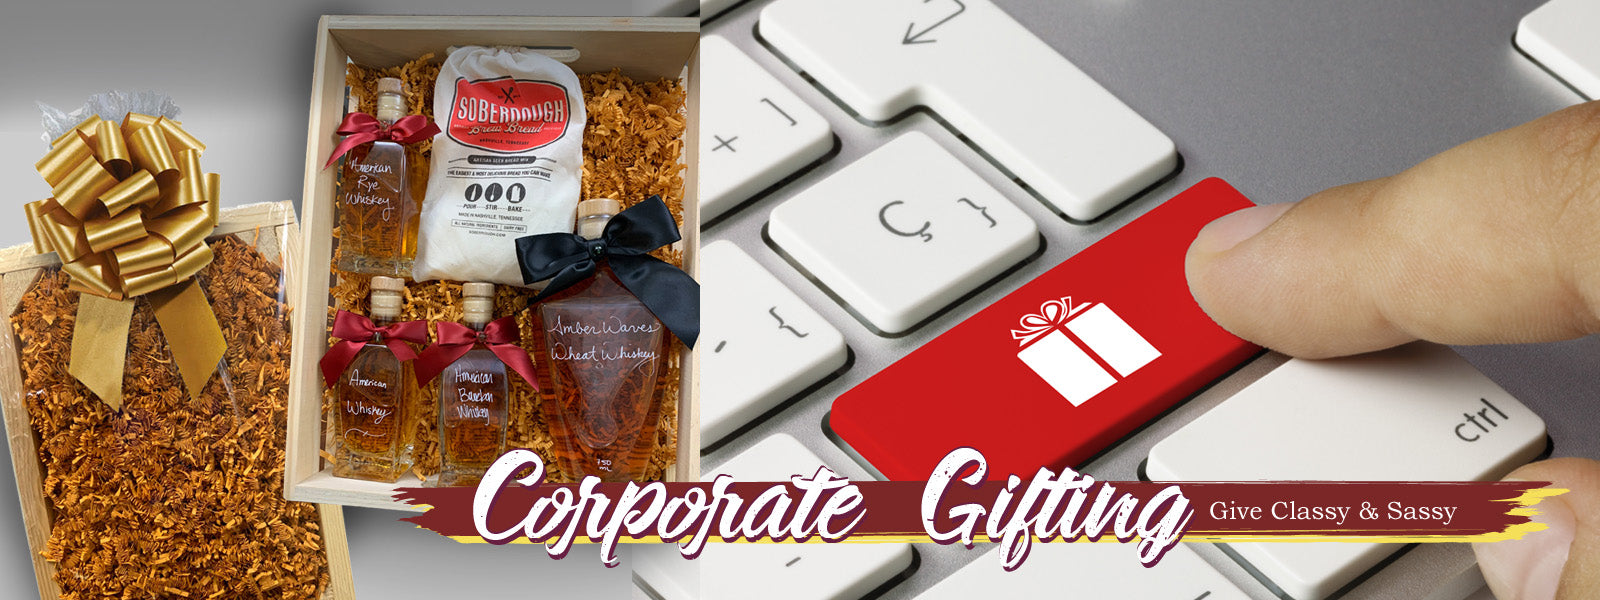 Corporate Gifts - Cookie Gifts for Employees and Clients | Susansnaps